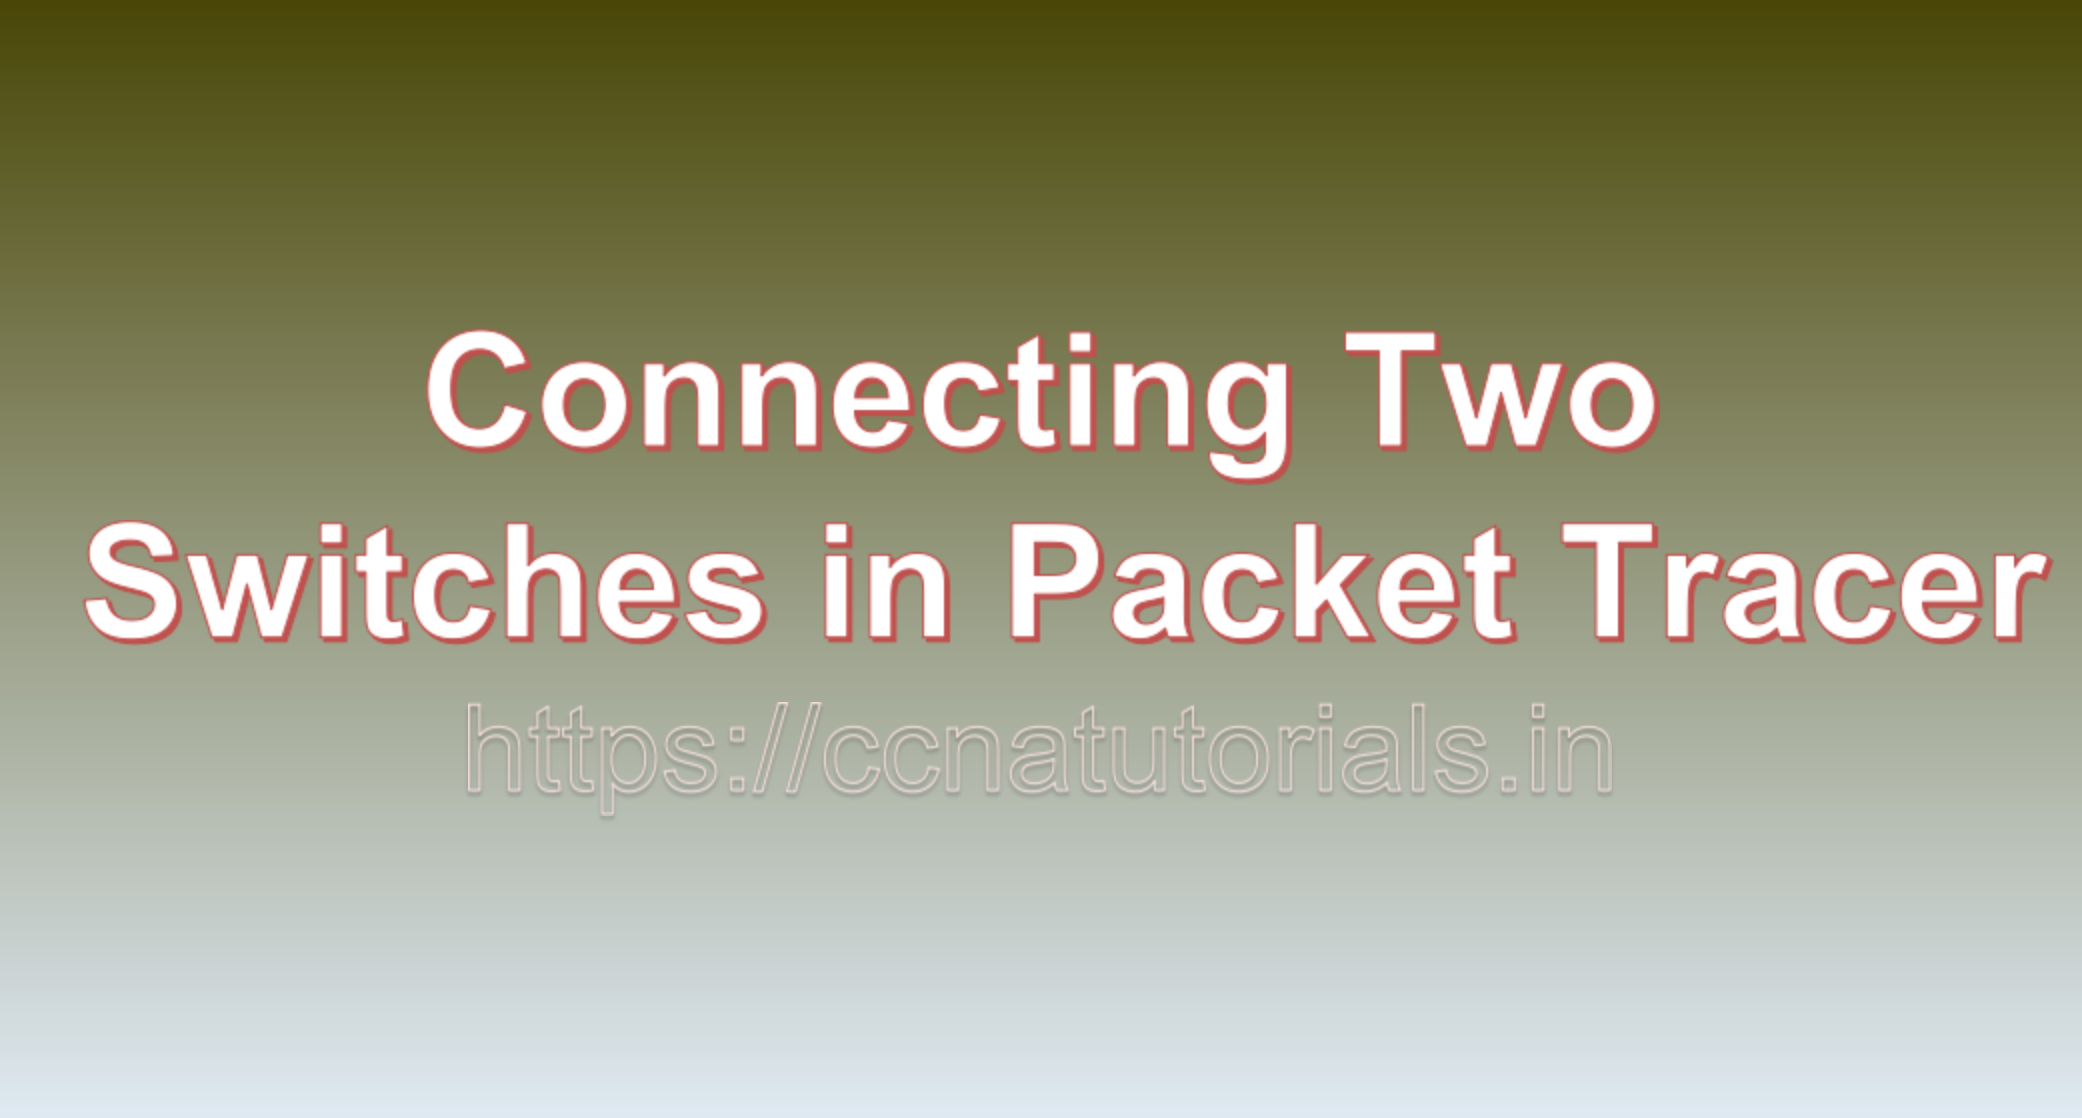 Connecting Two Switches in Packet Tracer, ccna, ccna tutorials